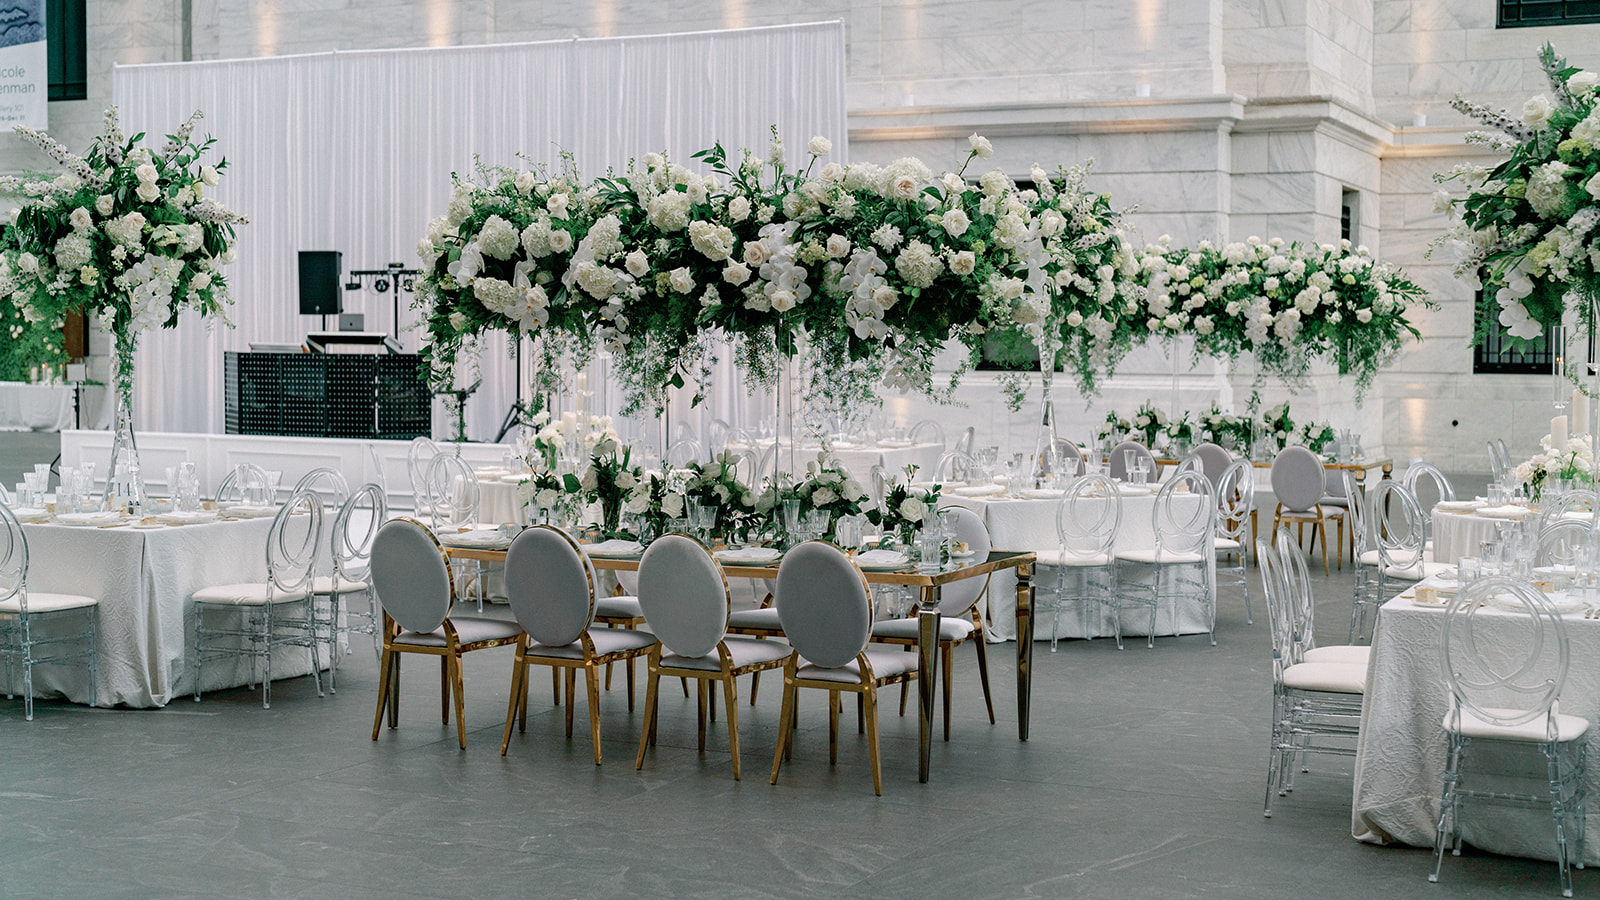 Cleveland Museum of Art, Gold and White Wedding Reception with elevated centerpieces at the Cleveland Museum of Art by HeatherLily